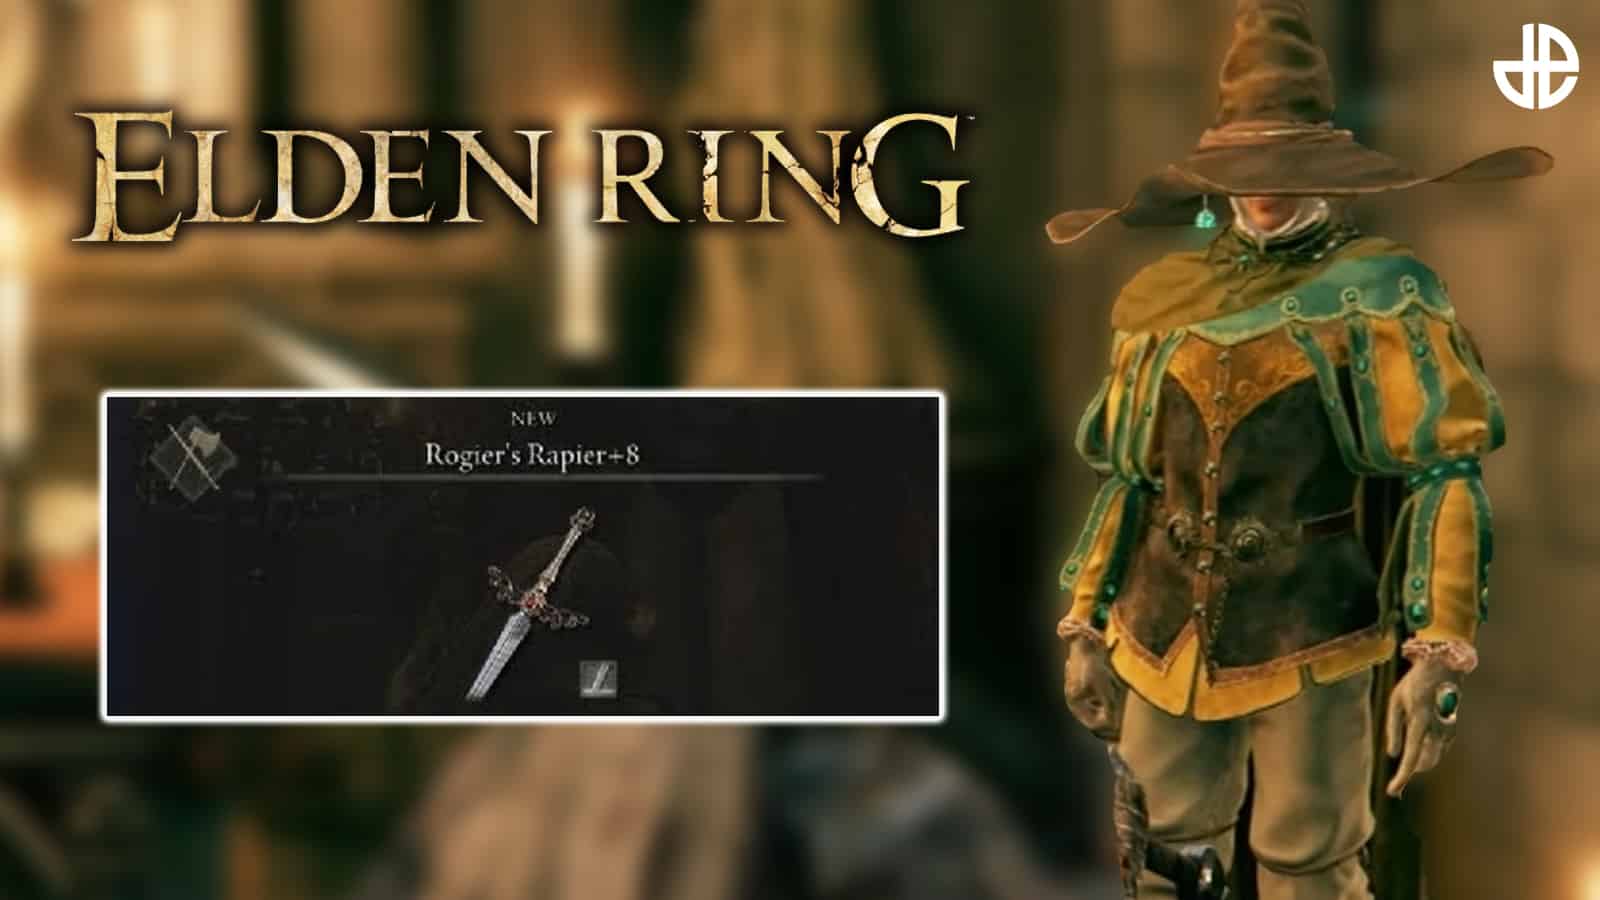 Top 10 hardest video games & franchises in history: Where does Elden Ring  rank? - Dexerto